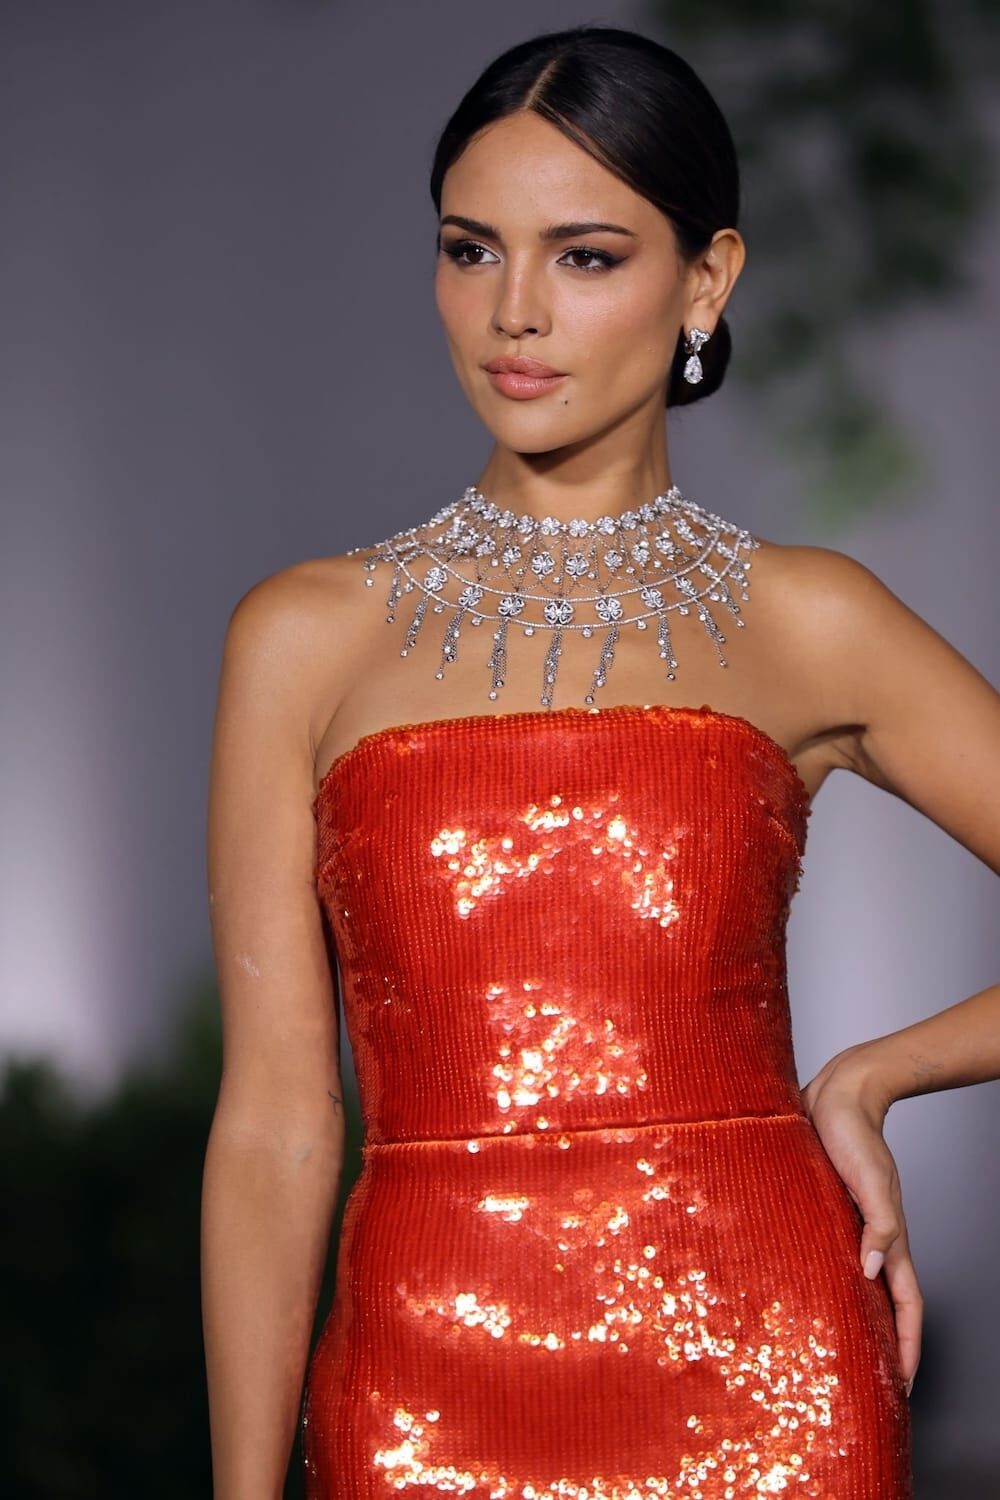 Academy Museum Gala 2022: Eiza Gonzalez in Bright Red LaQuan Smith Gown